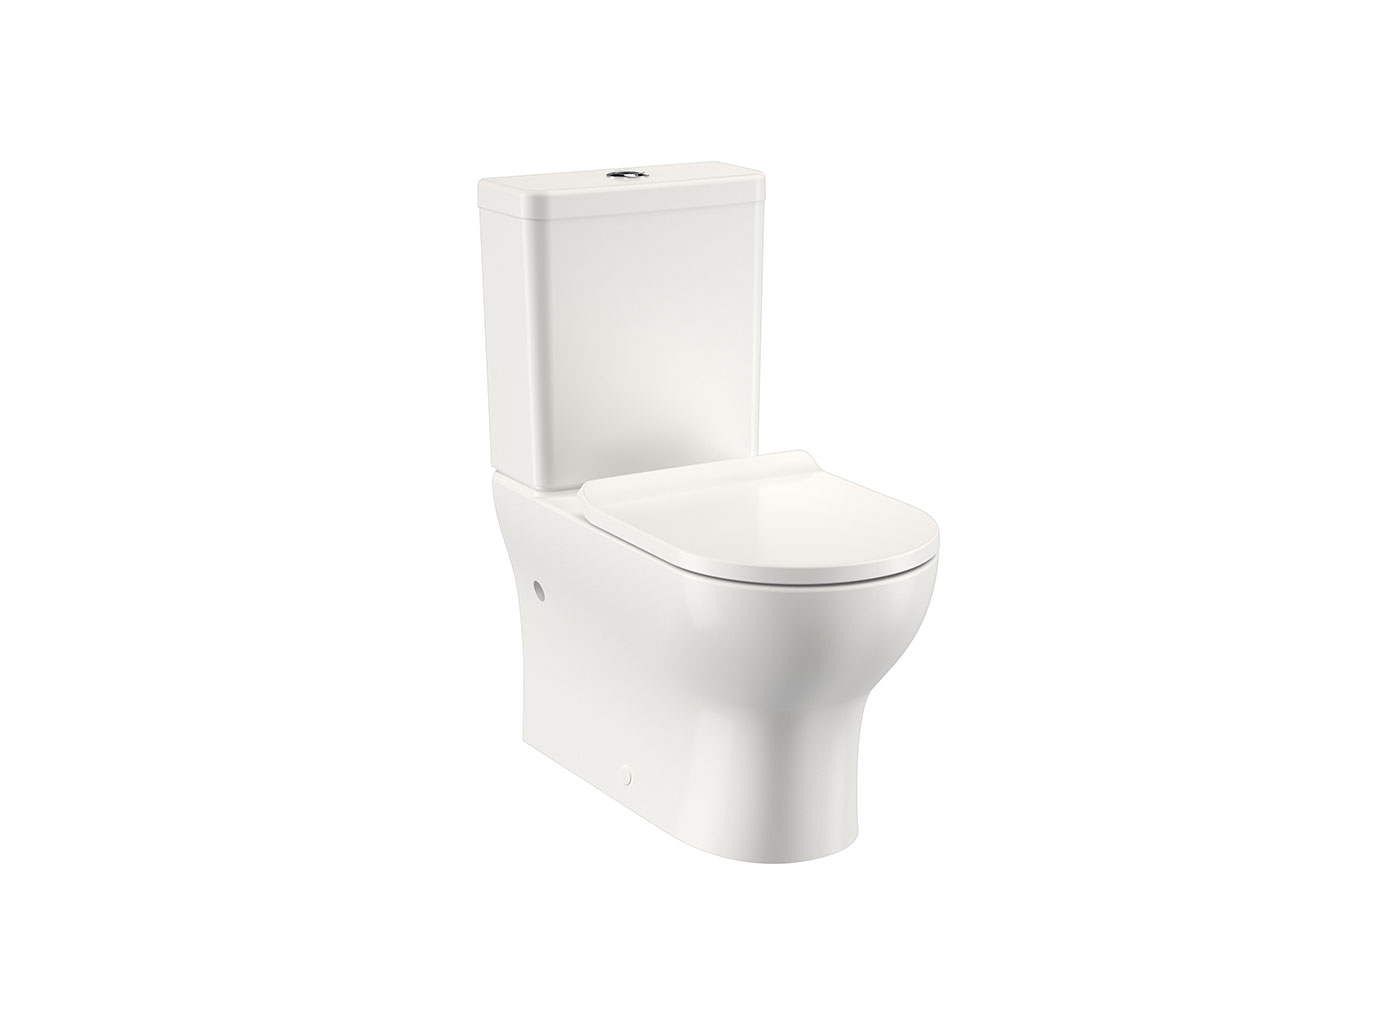 Take some time out on your very own alone throne. Clark's Back to Wall toilet suites are the best seat in the house!